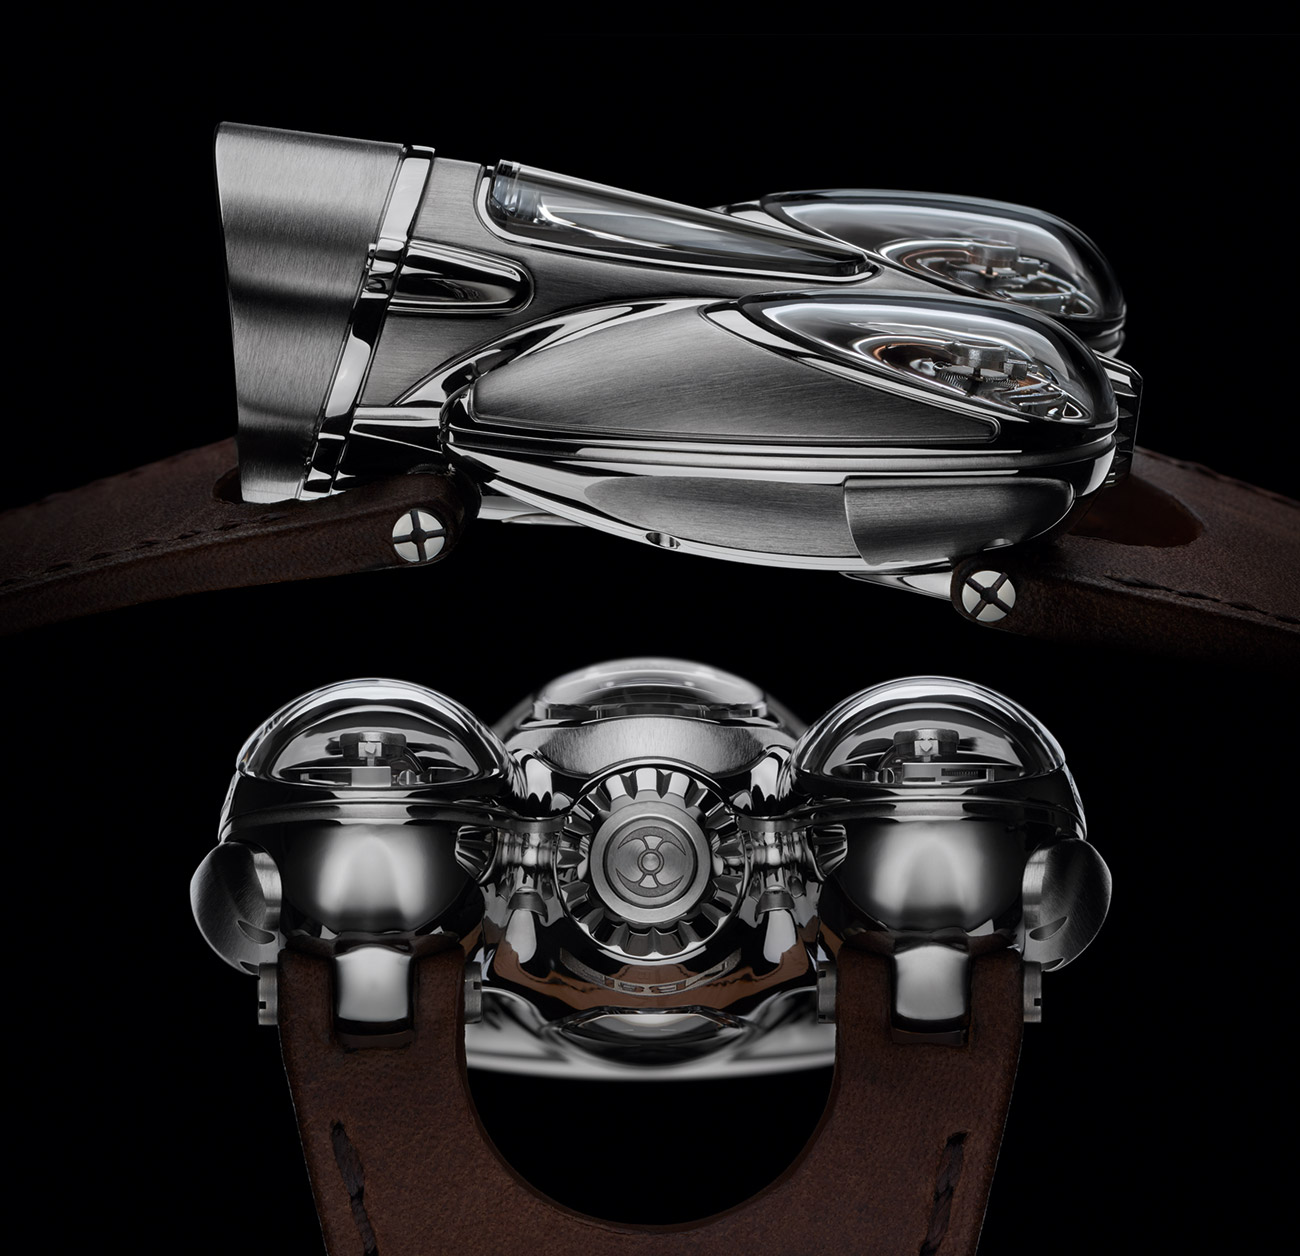 MB&F's new Horological Machine No. 9 Flow watches MBF-Horological-Machine-No-9-HM9-Flow-Air-Road-aBlogtoWatch-4